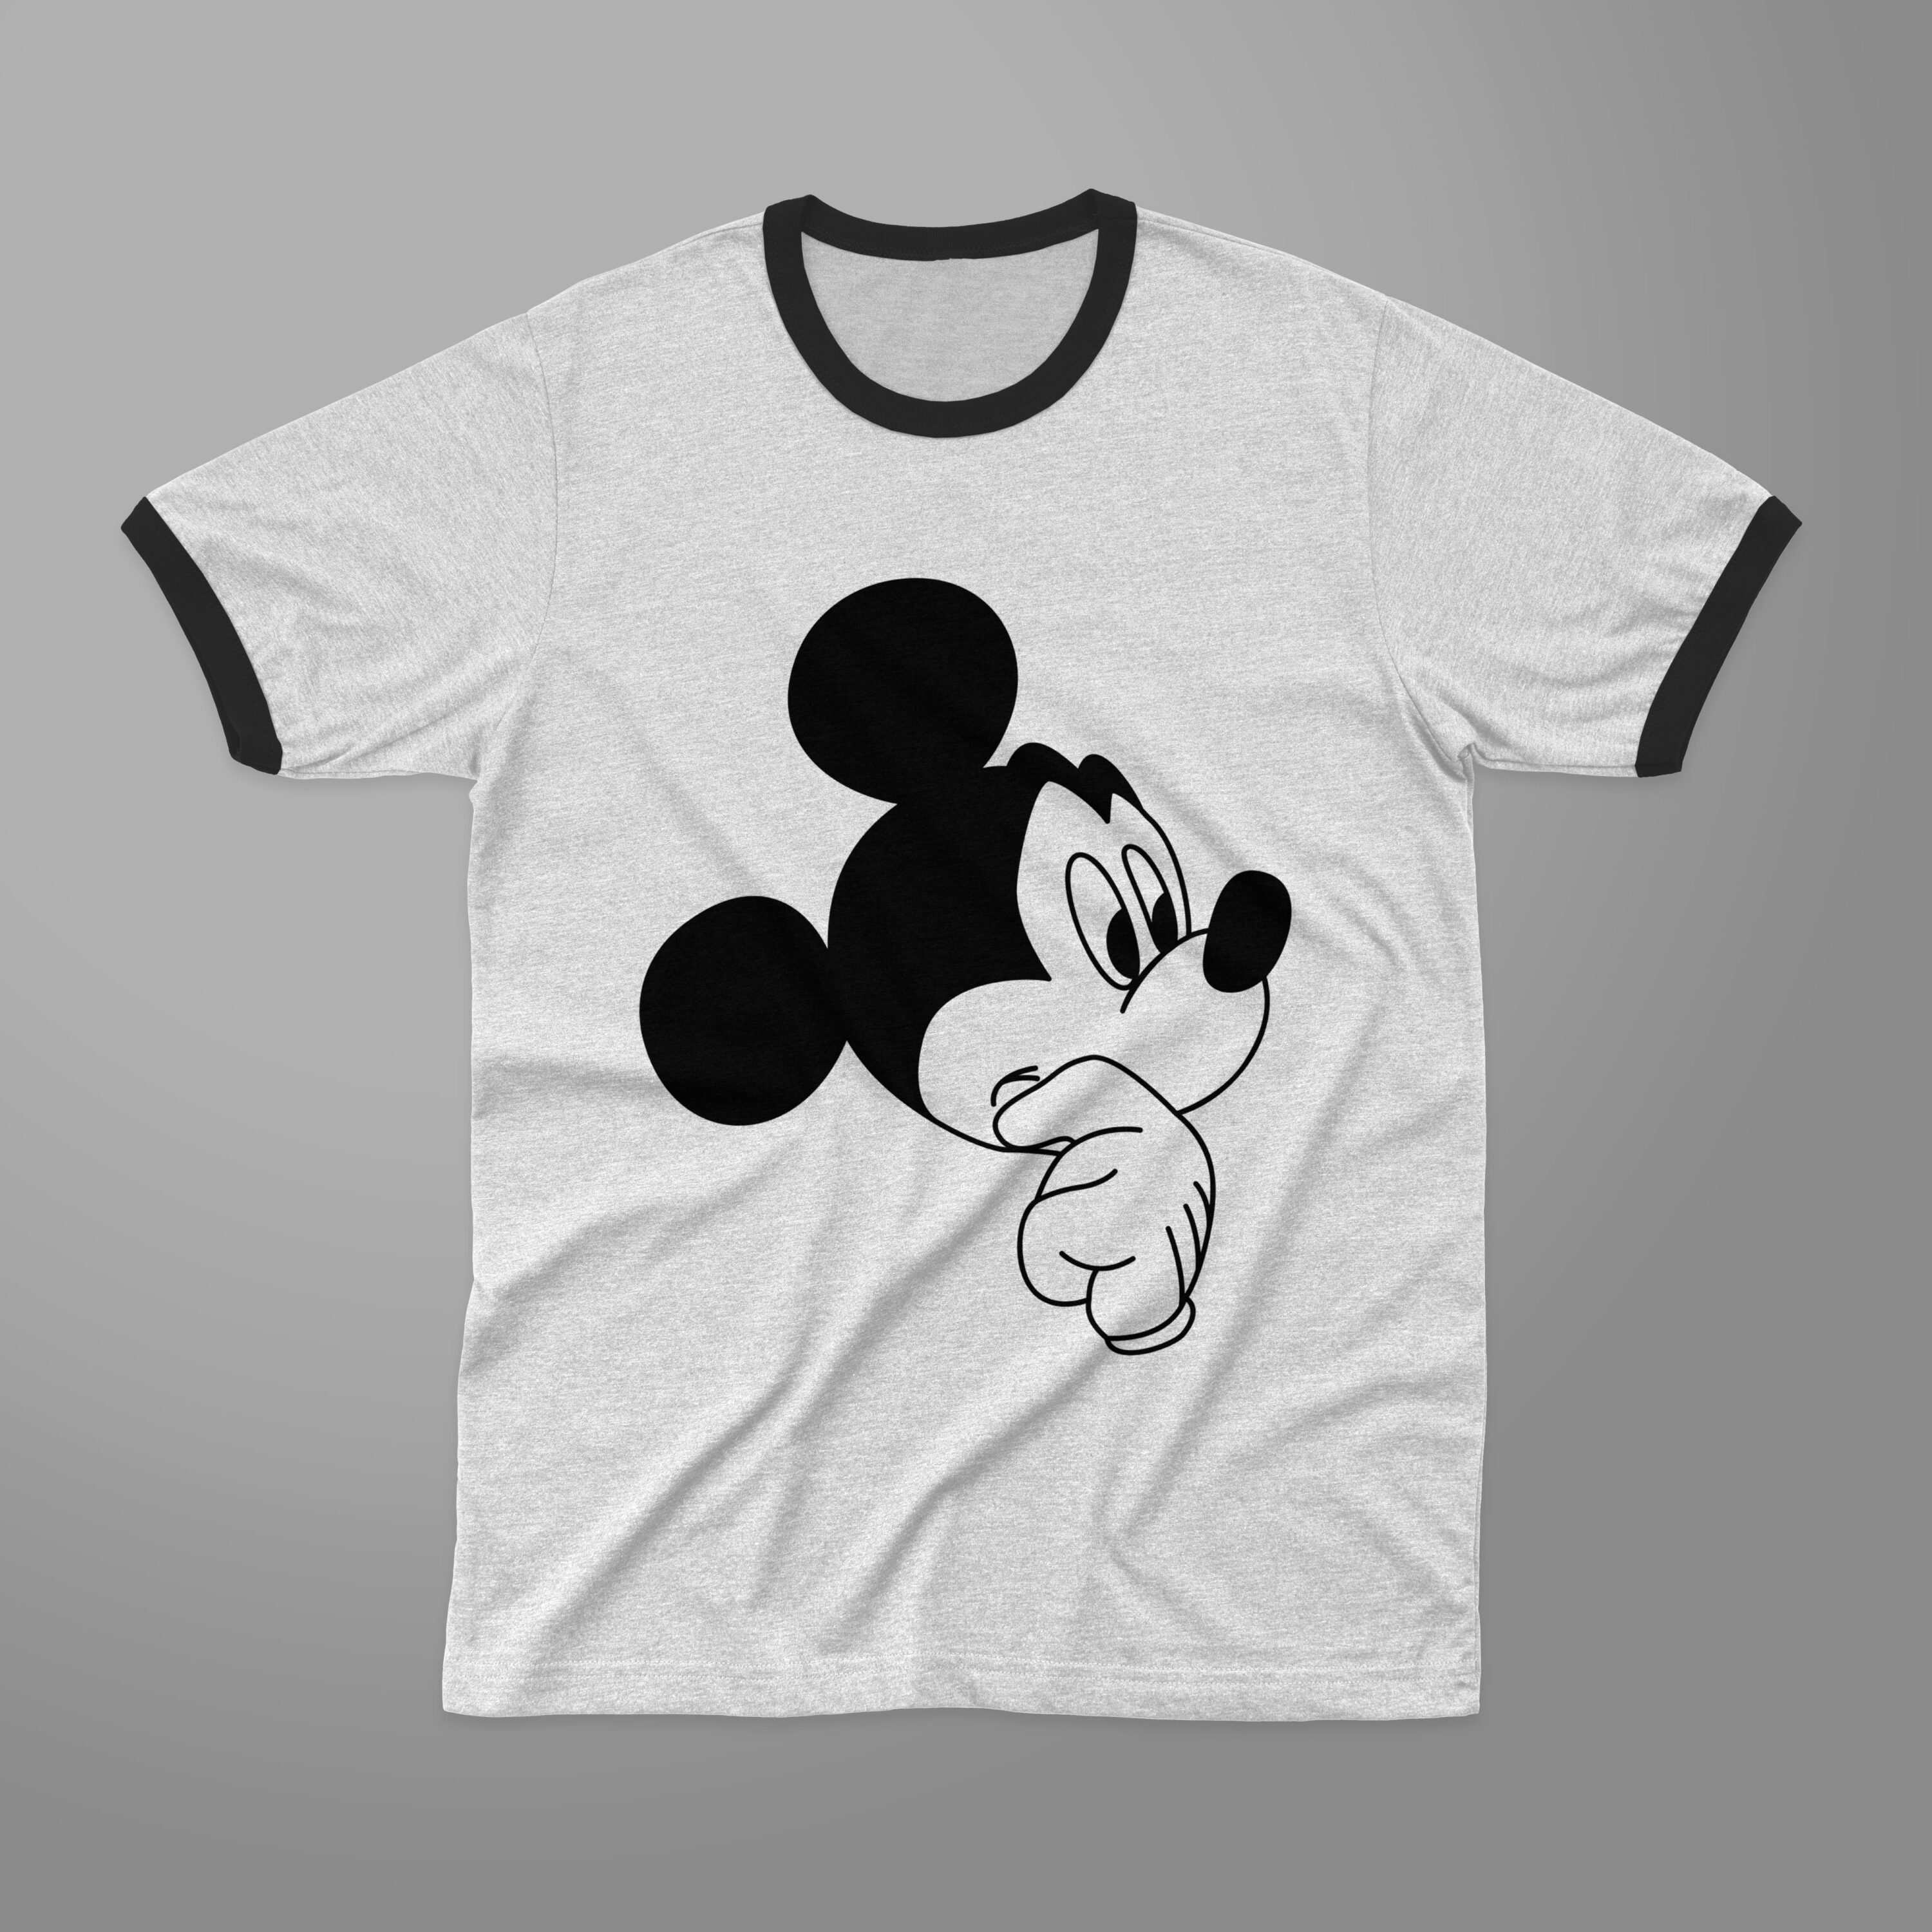 Cute t-shirt with mickey mouse face.